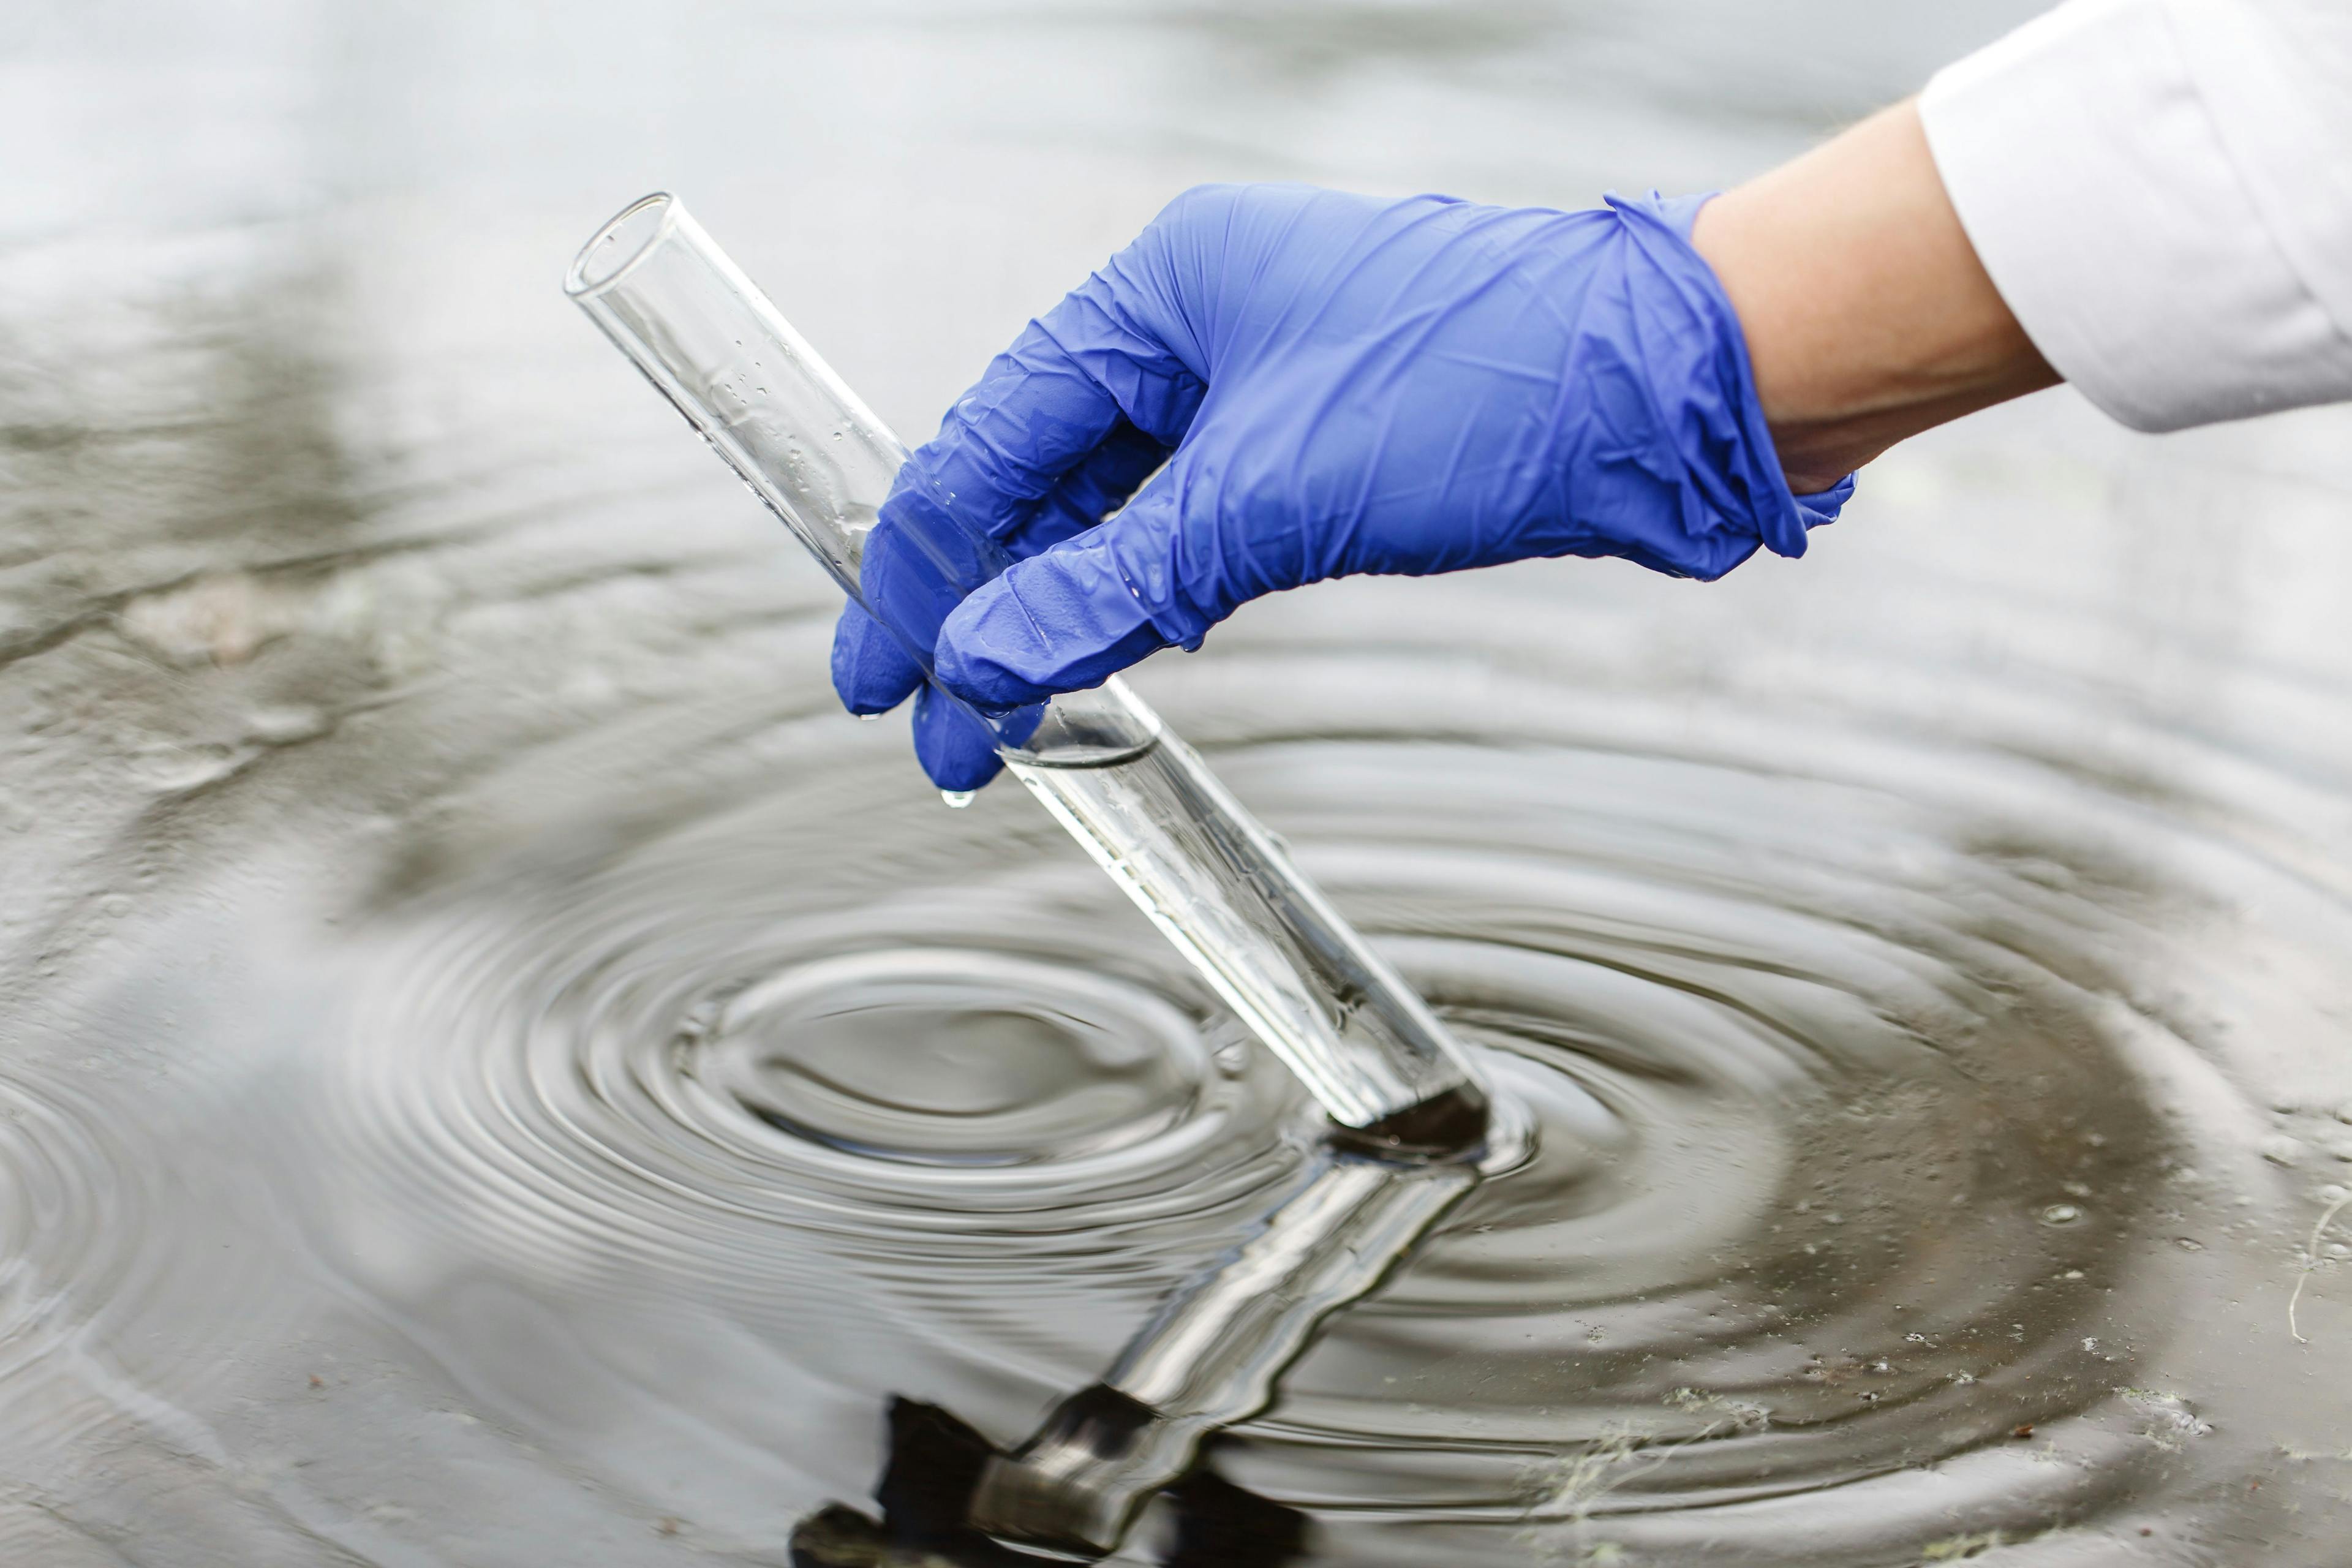 Researcher holds a test tube with water in a hand in blue glove | Image Credit: © IVASHstudio - stock.adobe.com